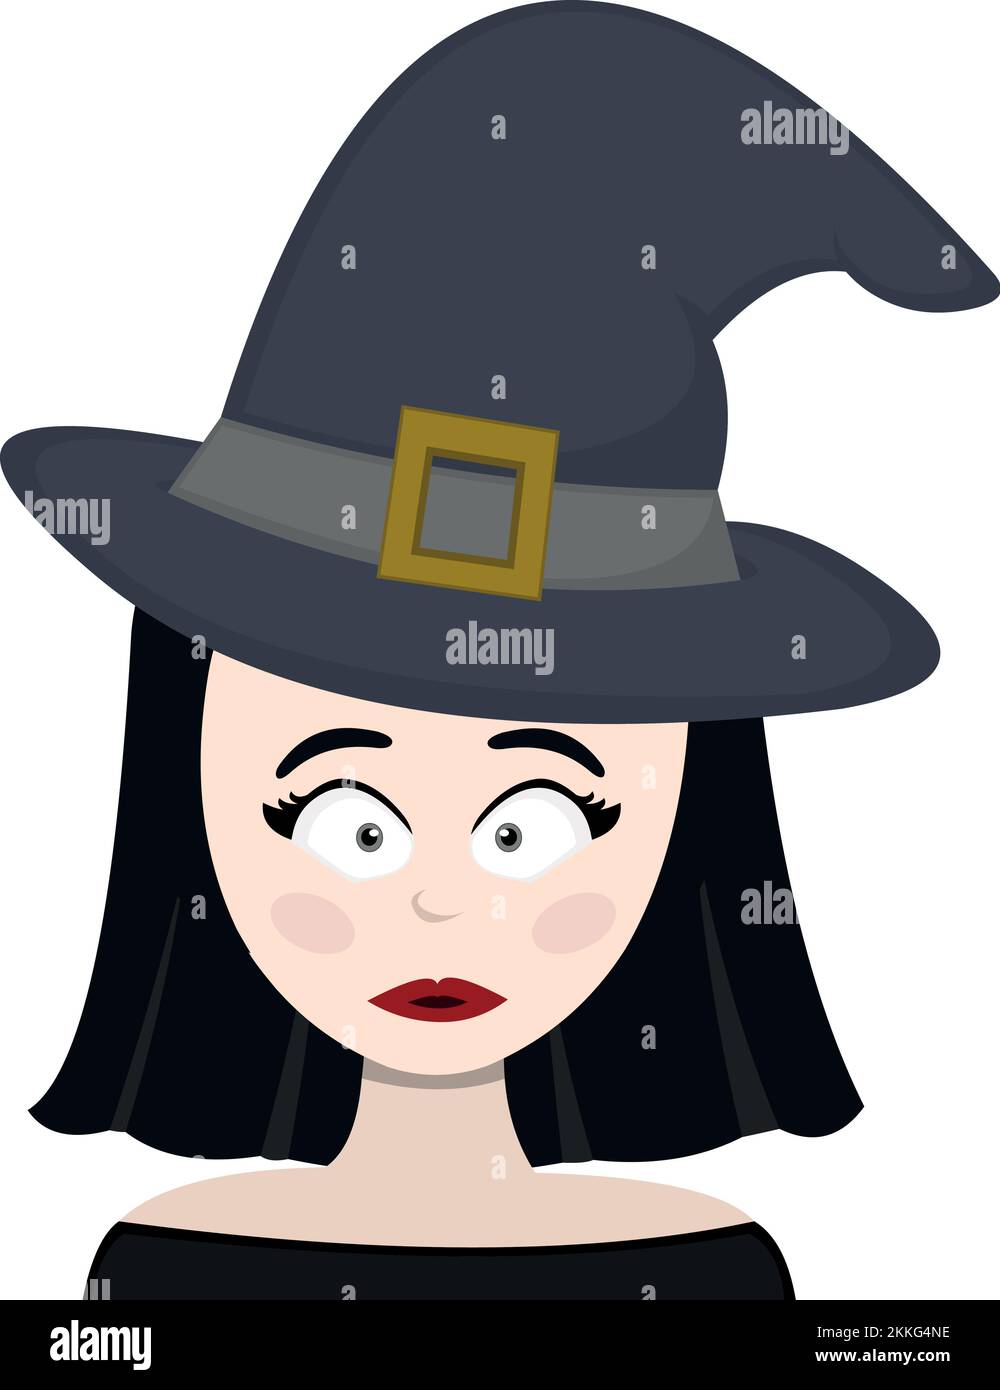 vector illustration of a cartoon witch with an embarrassed and blushing expression Stock Vector